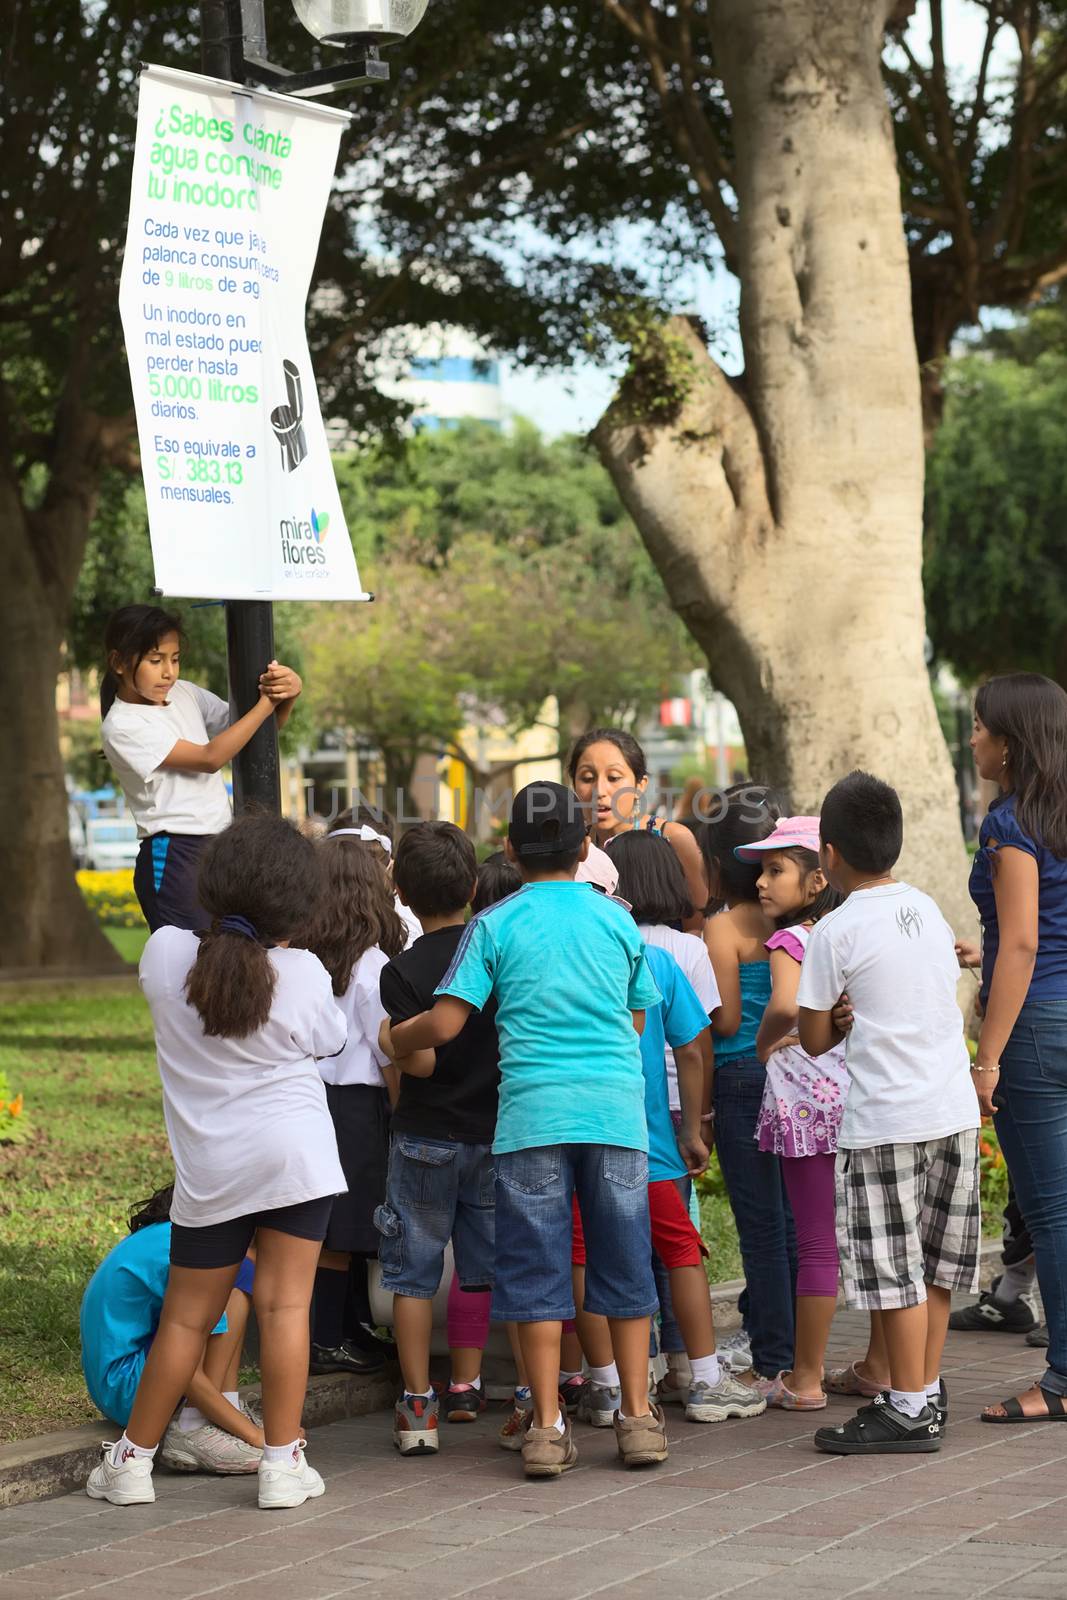 Informing About Water Use in Miraflores, Lima, Peru by ildi